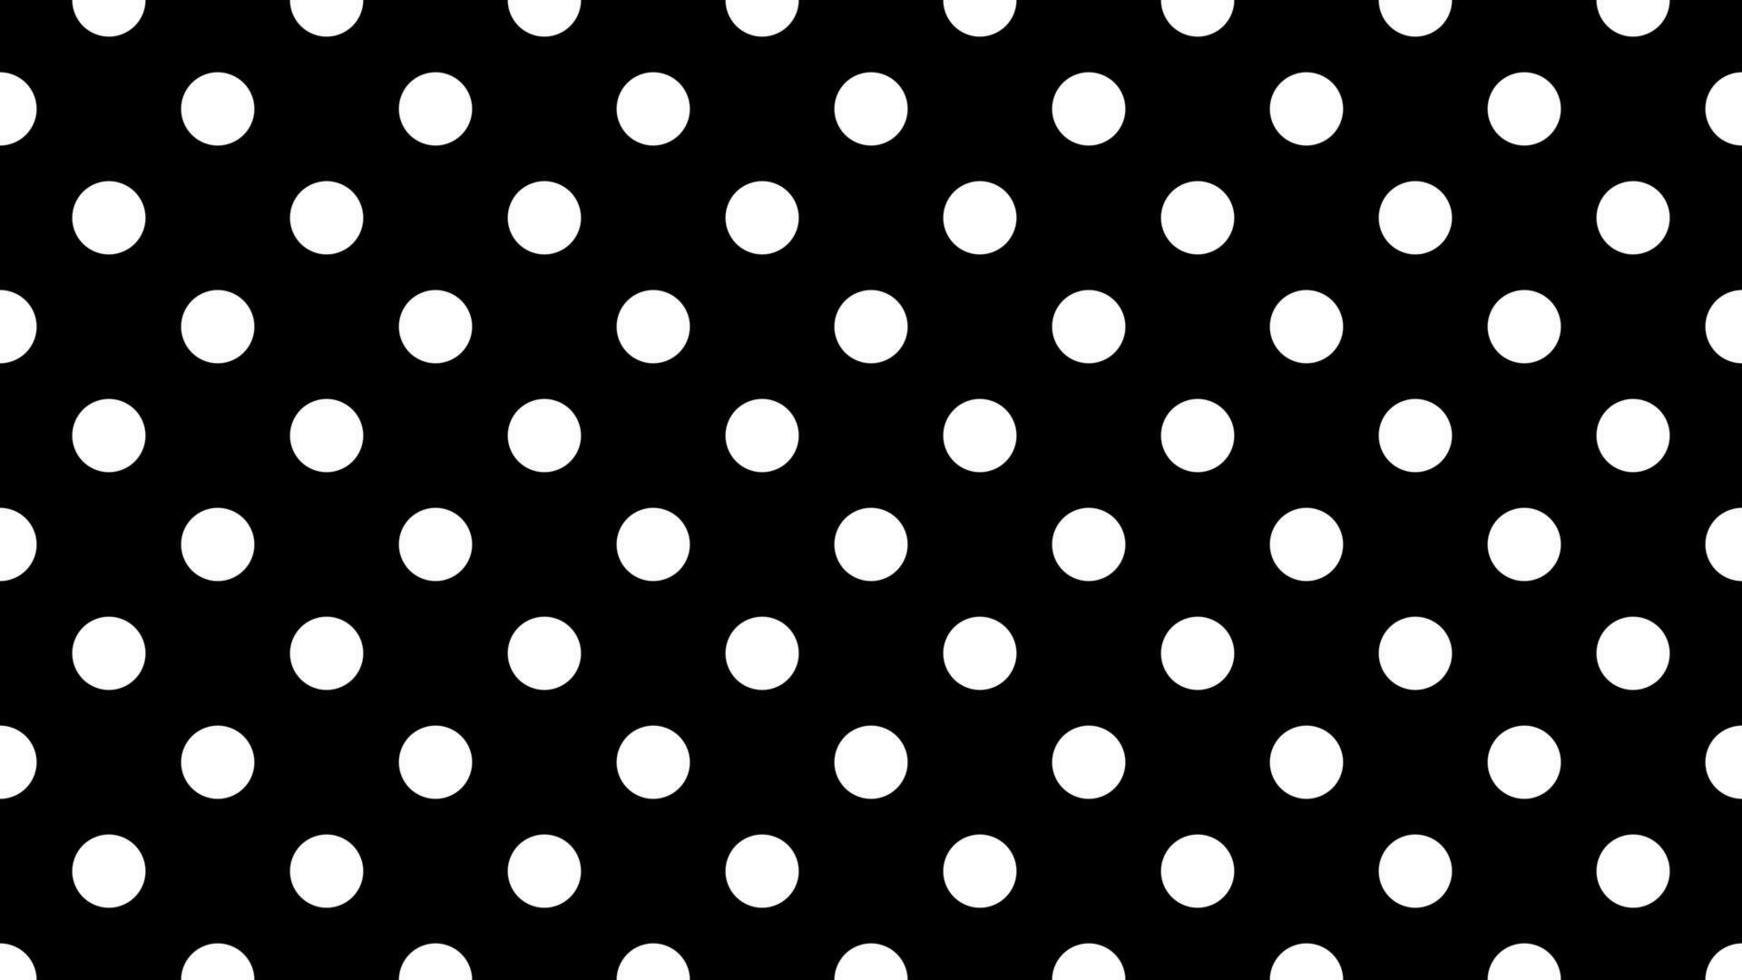 white color polka dots over background vector